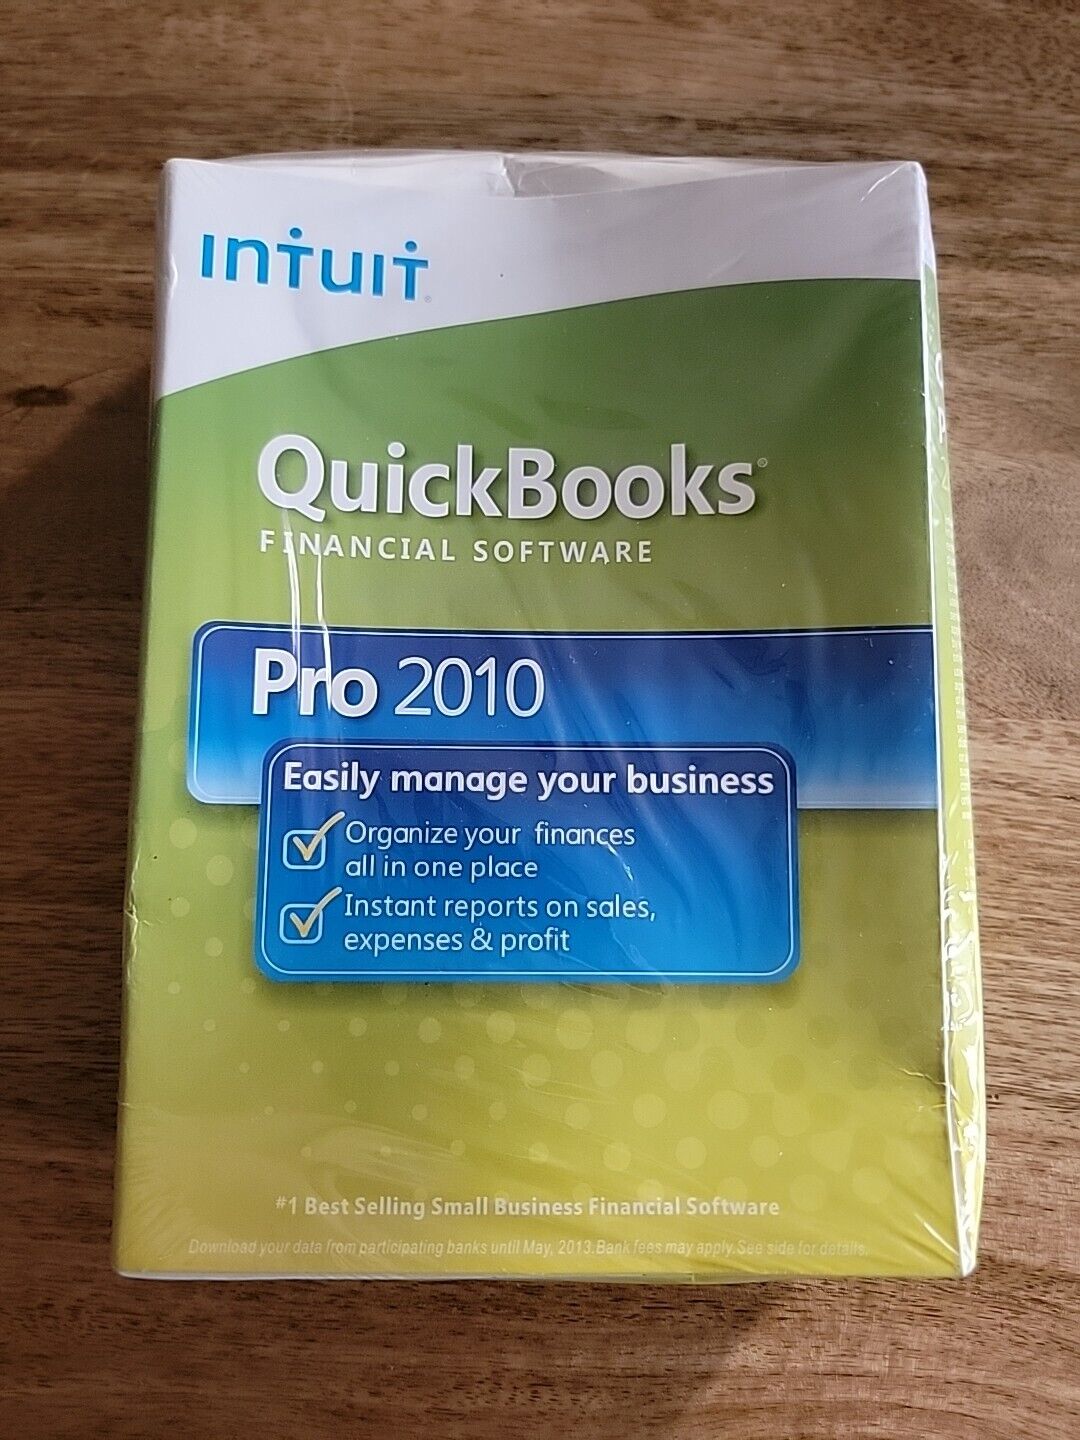 INTUIT QUICKBOOKS PRO 2010 FOR WINDOWS FULL RETAIL USA VERSION =NEW SEALED BOX=